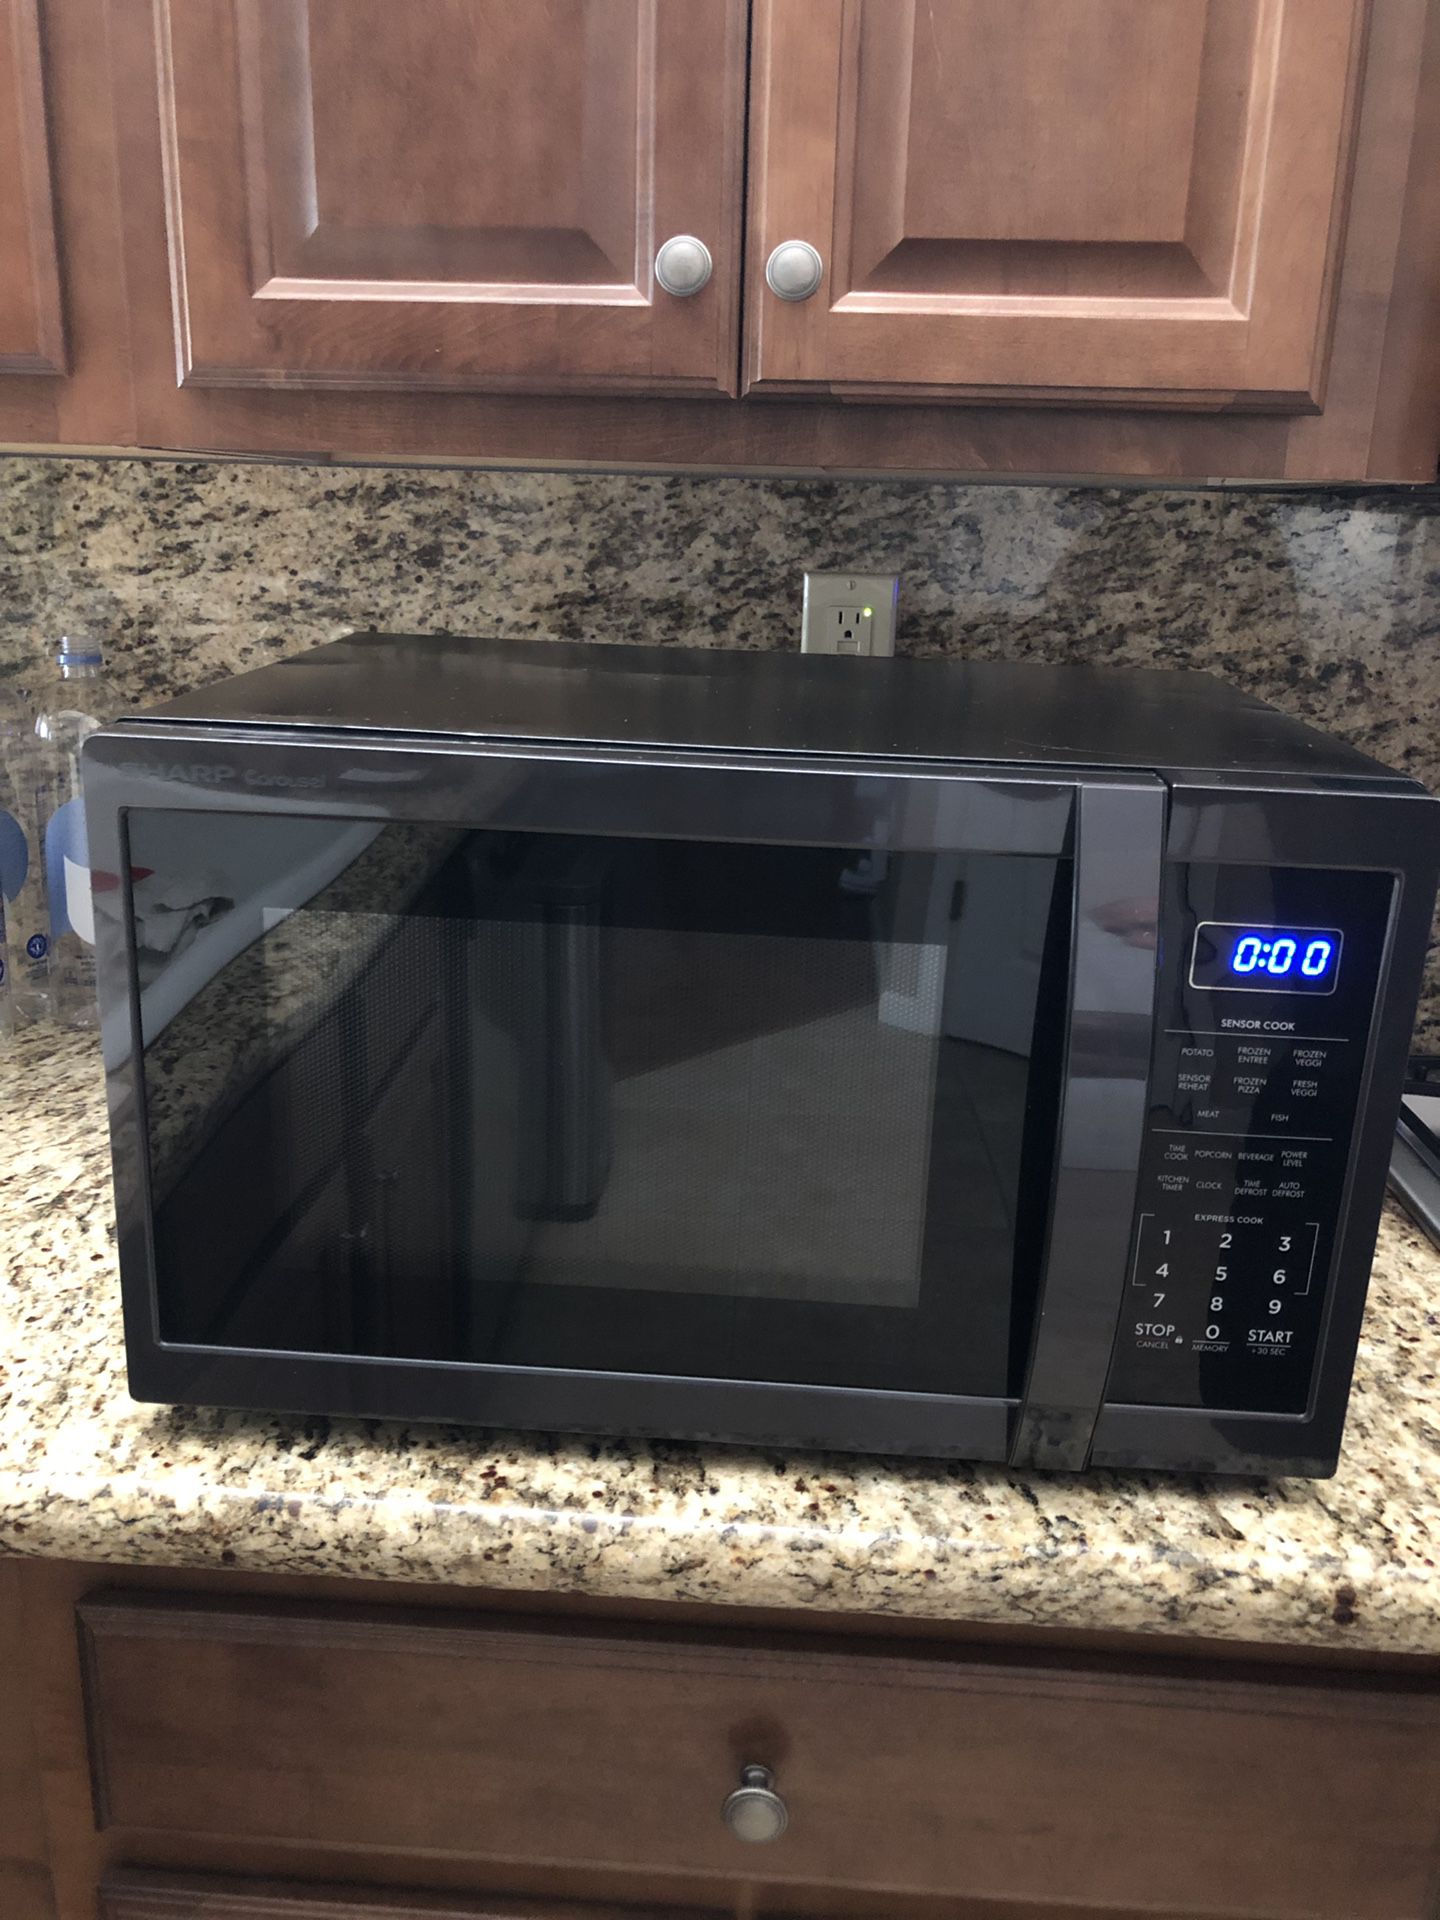 Sharp microwave (New) dents on top